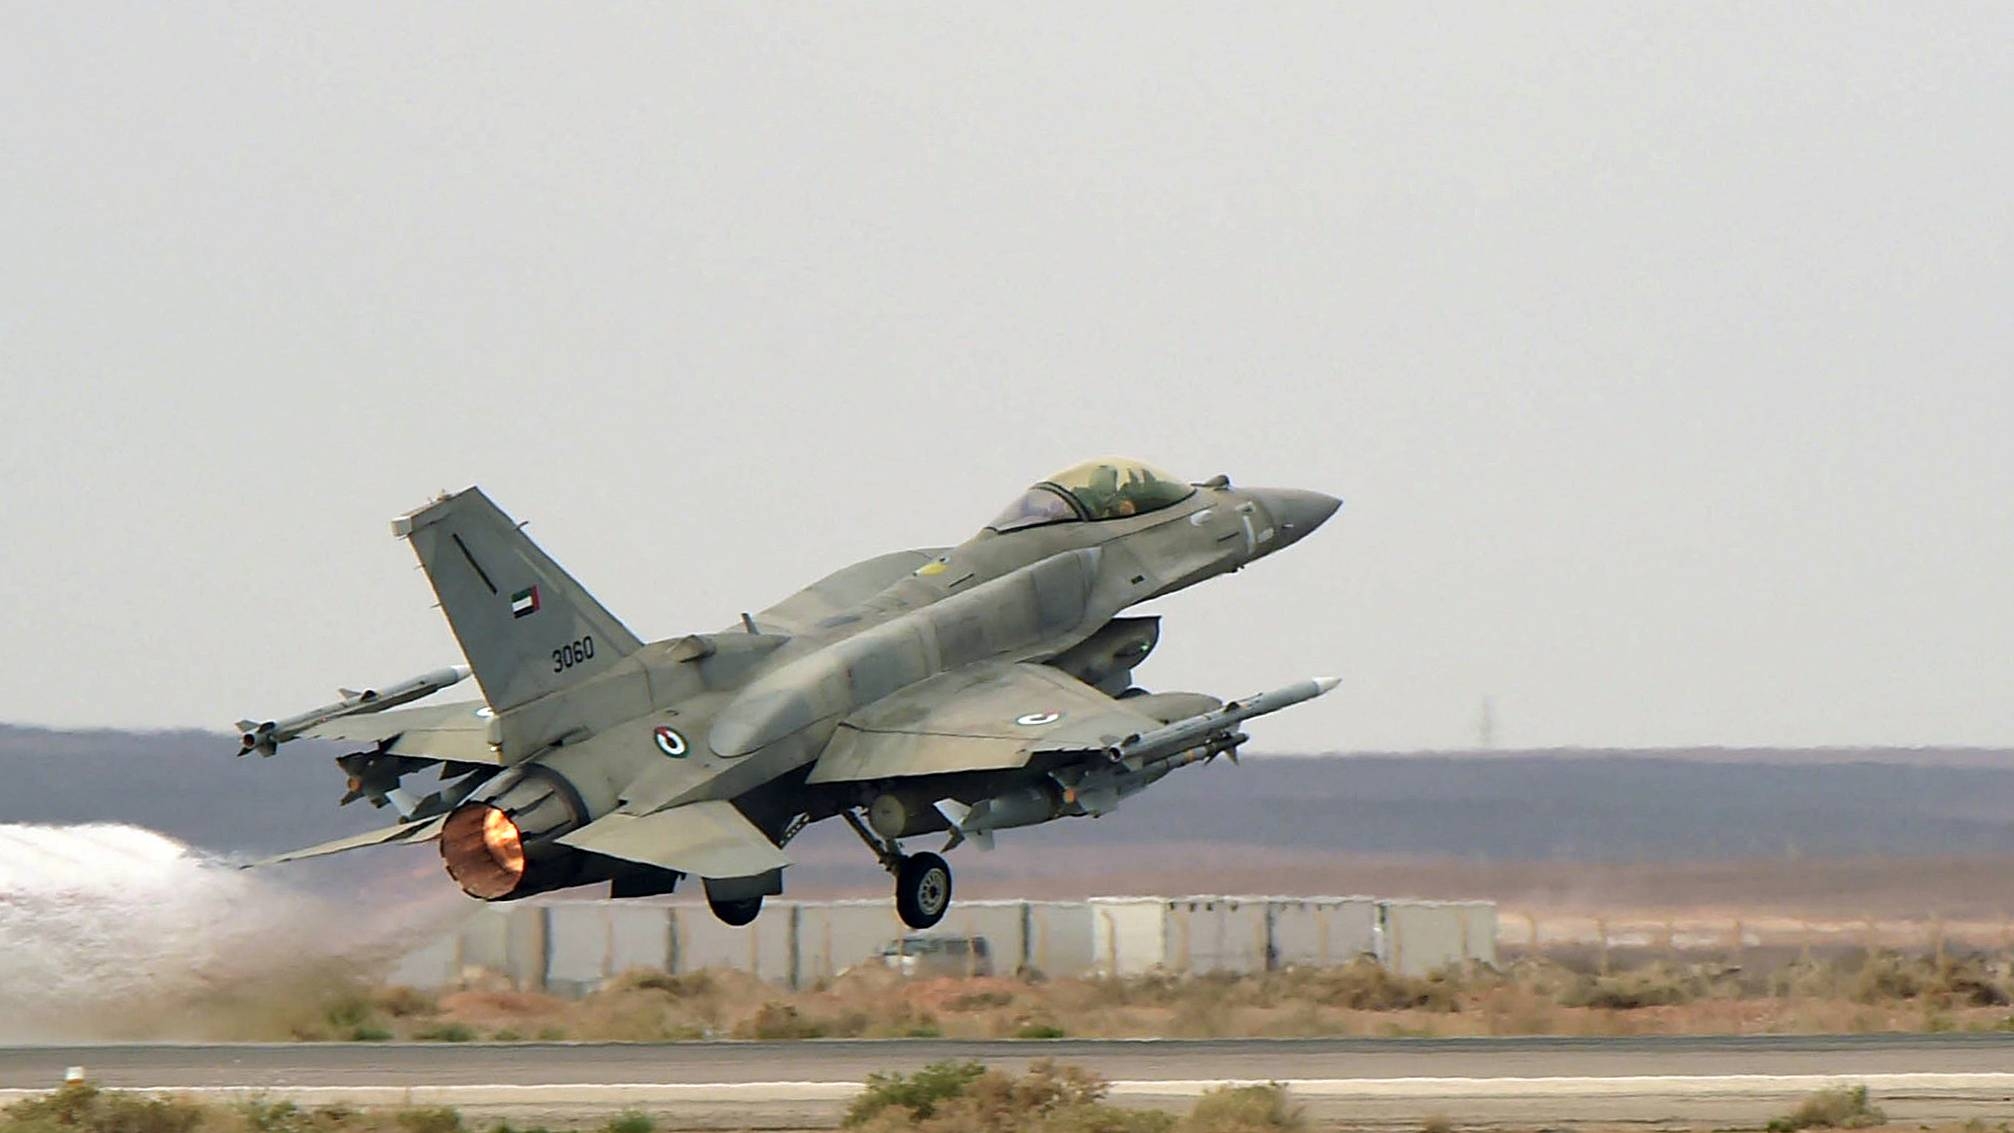 An American-made F-16 jet of the UAE's armed forces takes off from an air base in Jordan on 15 February 2015.